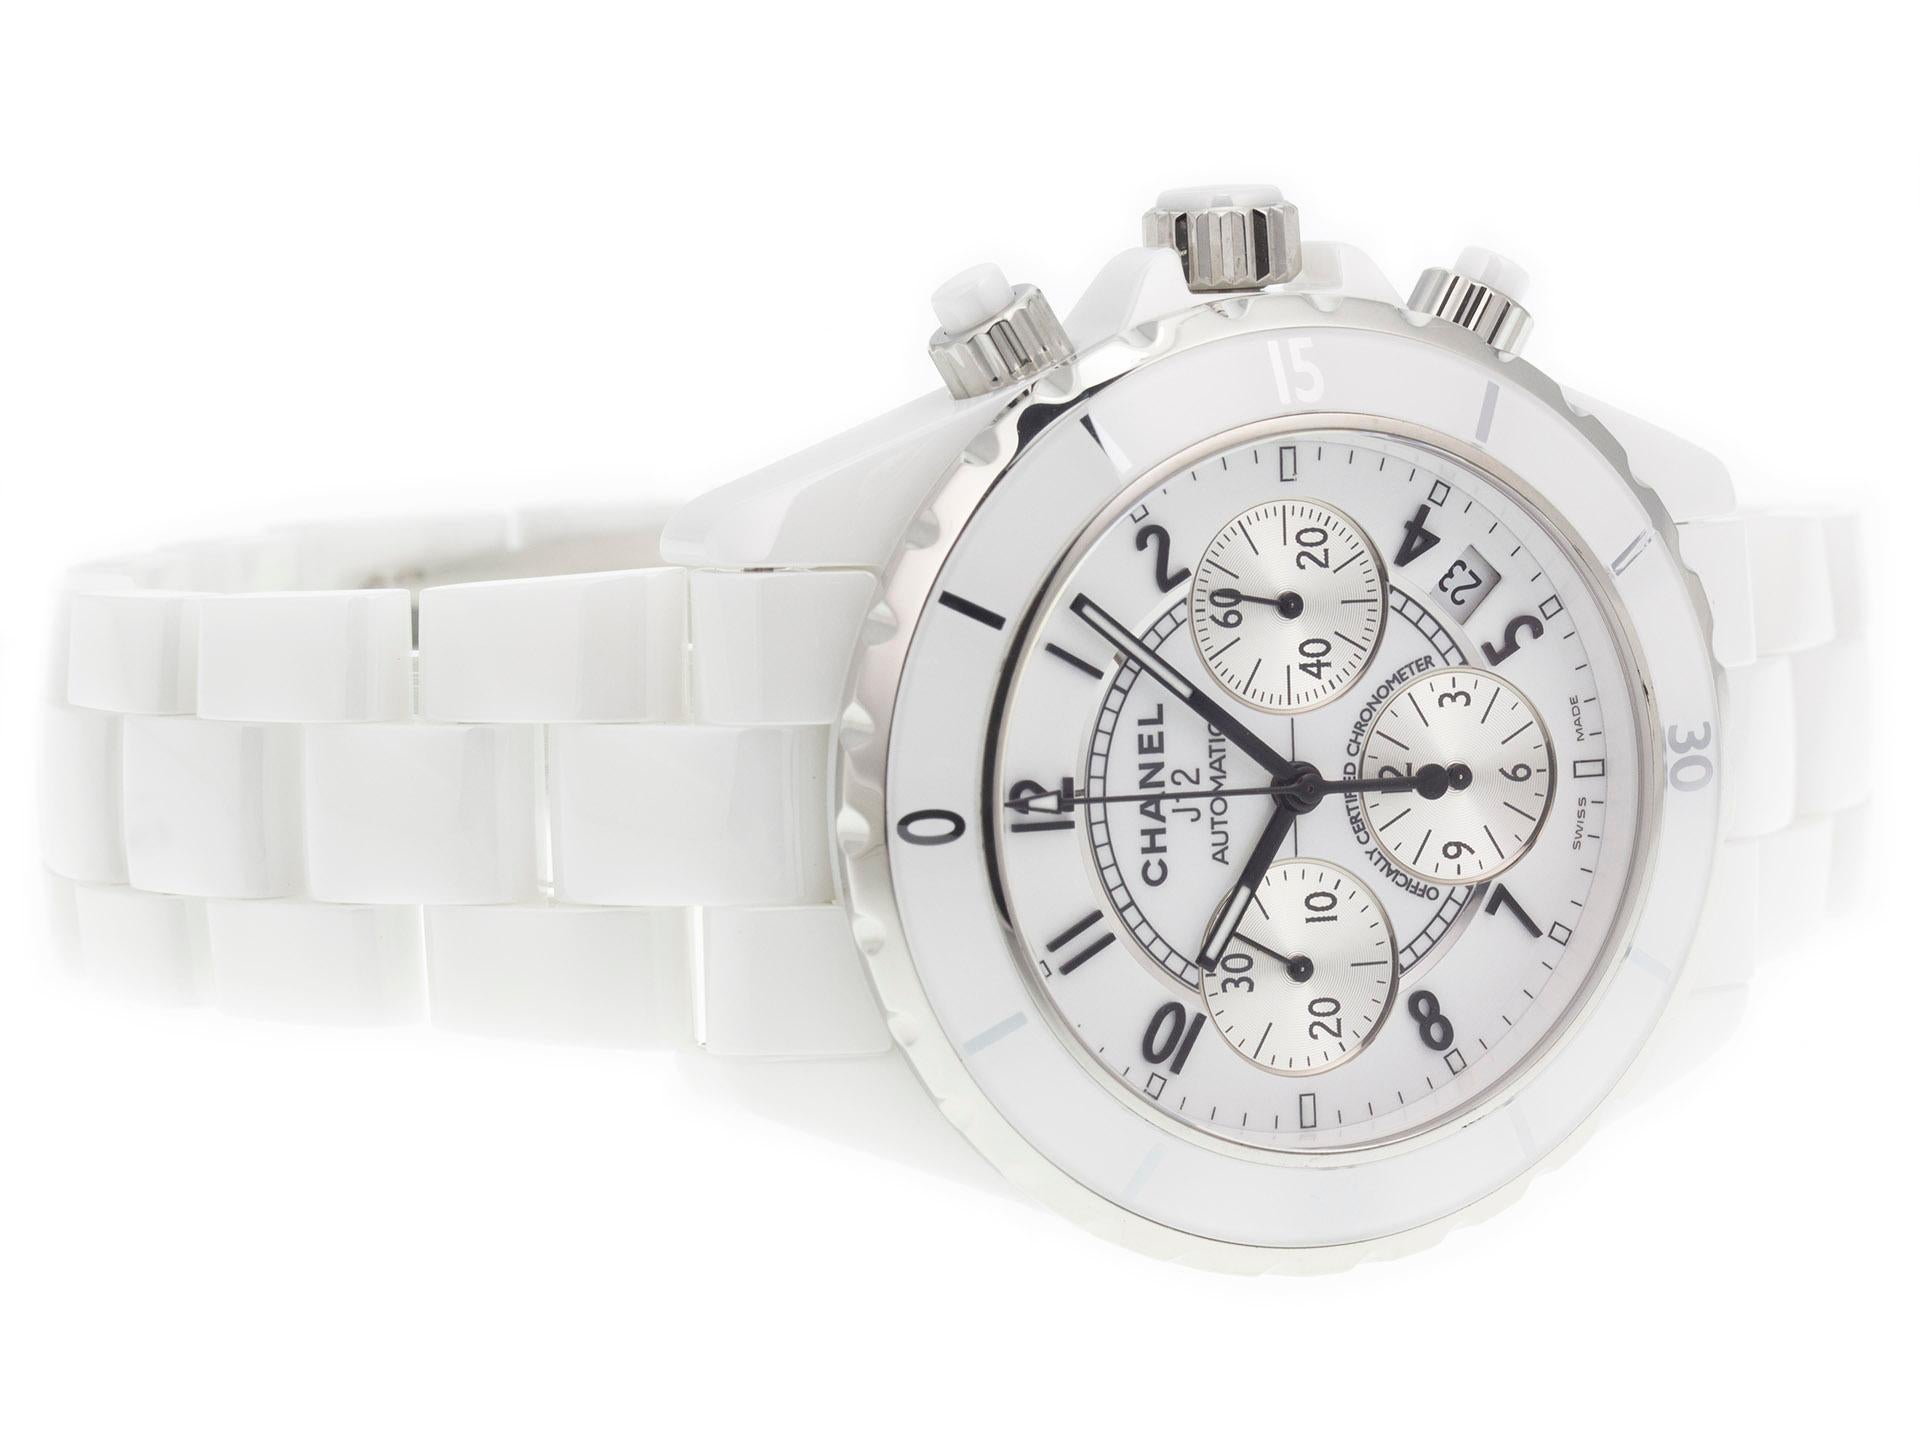 Chanel J12 Chronograph H1007  white ceramic bracelet watch, water resistance to 200m, with date, chronograph.

Watch	
Brand:	Chanel
Series:	J12 Chronograph
Model #:	H1007
Gender:	Unisex
Condition:	Excellent Display Model, Tiny Dings on Case &